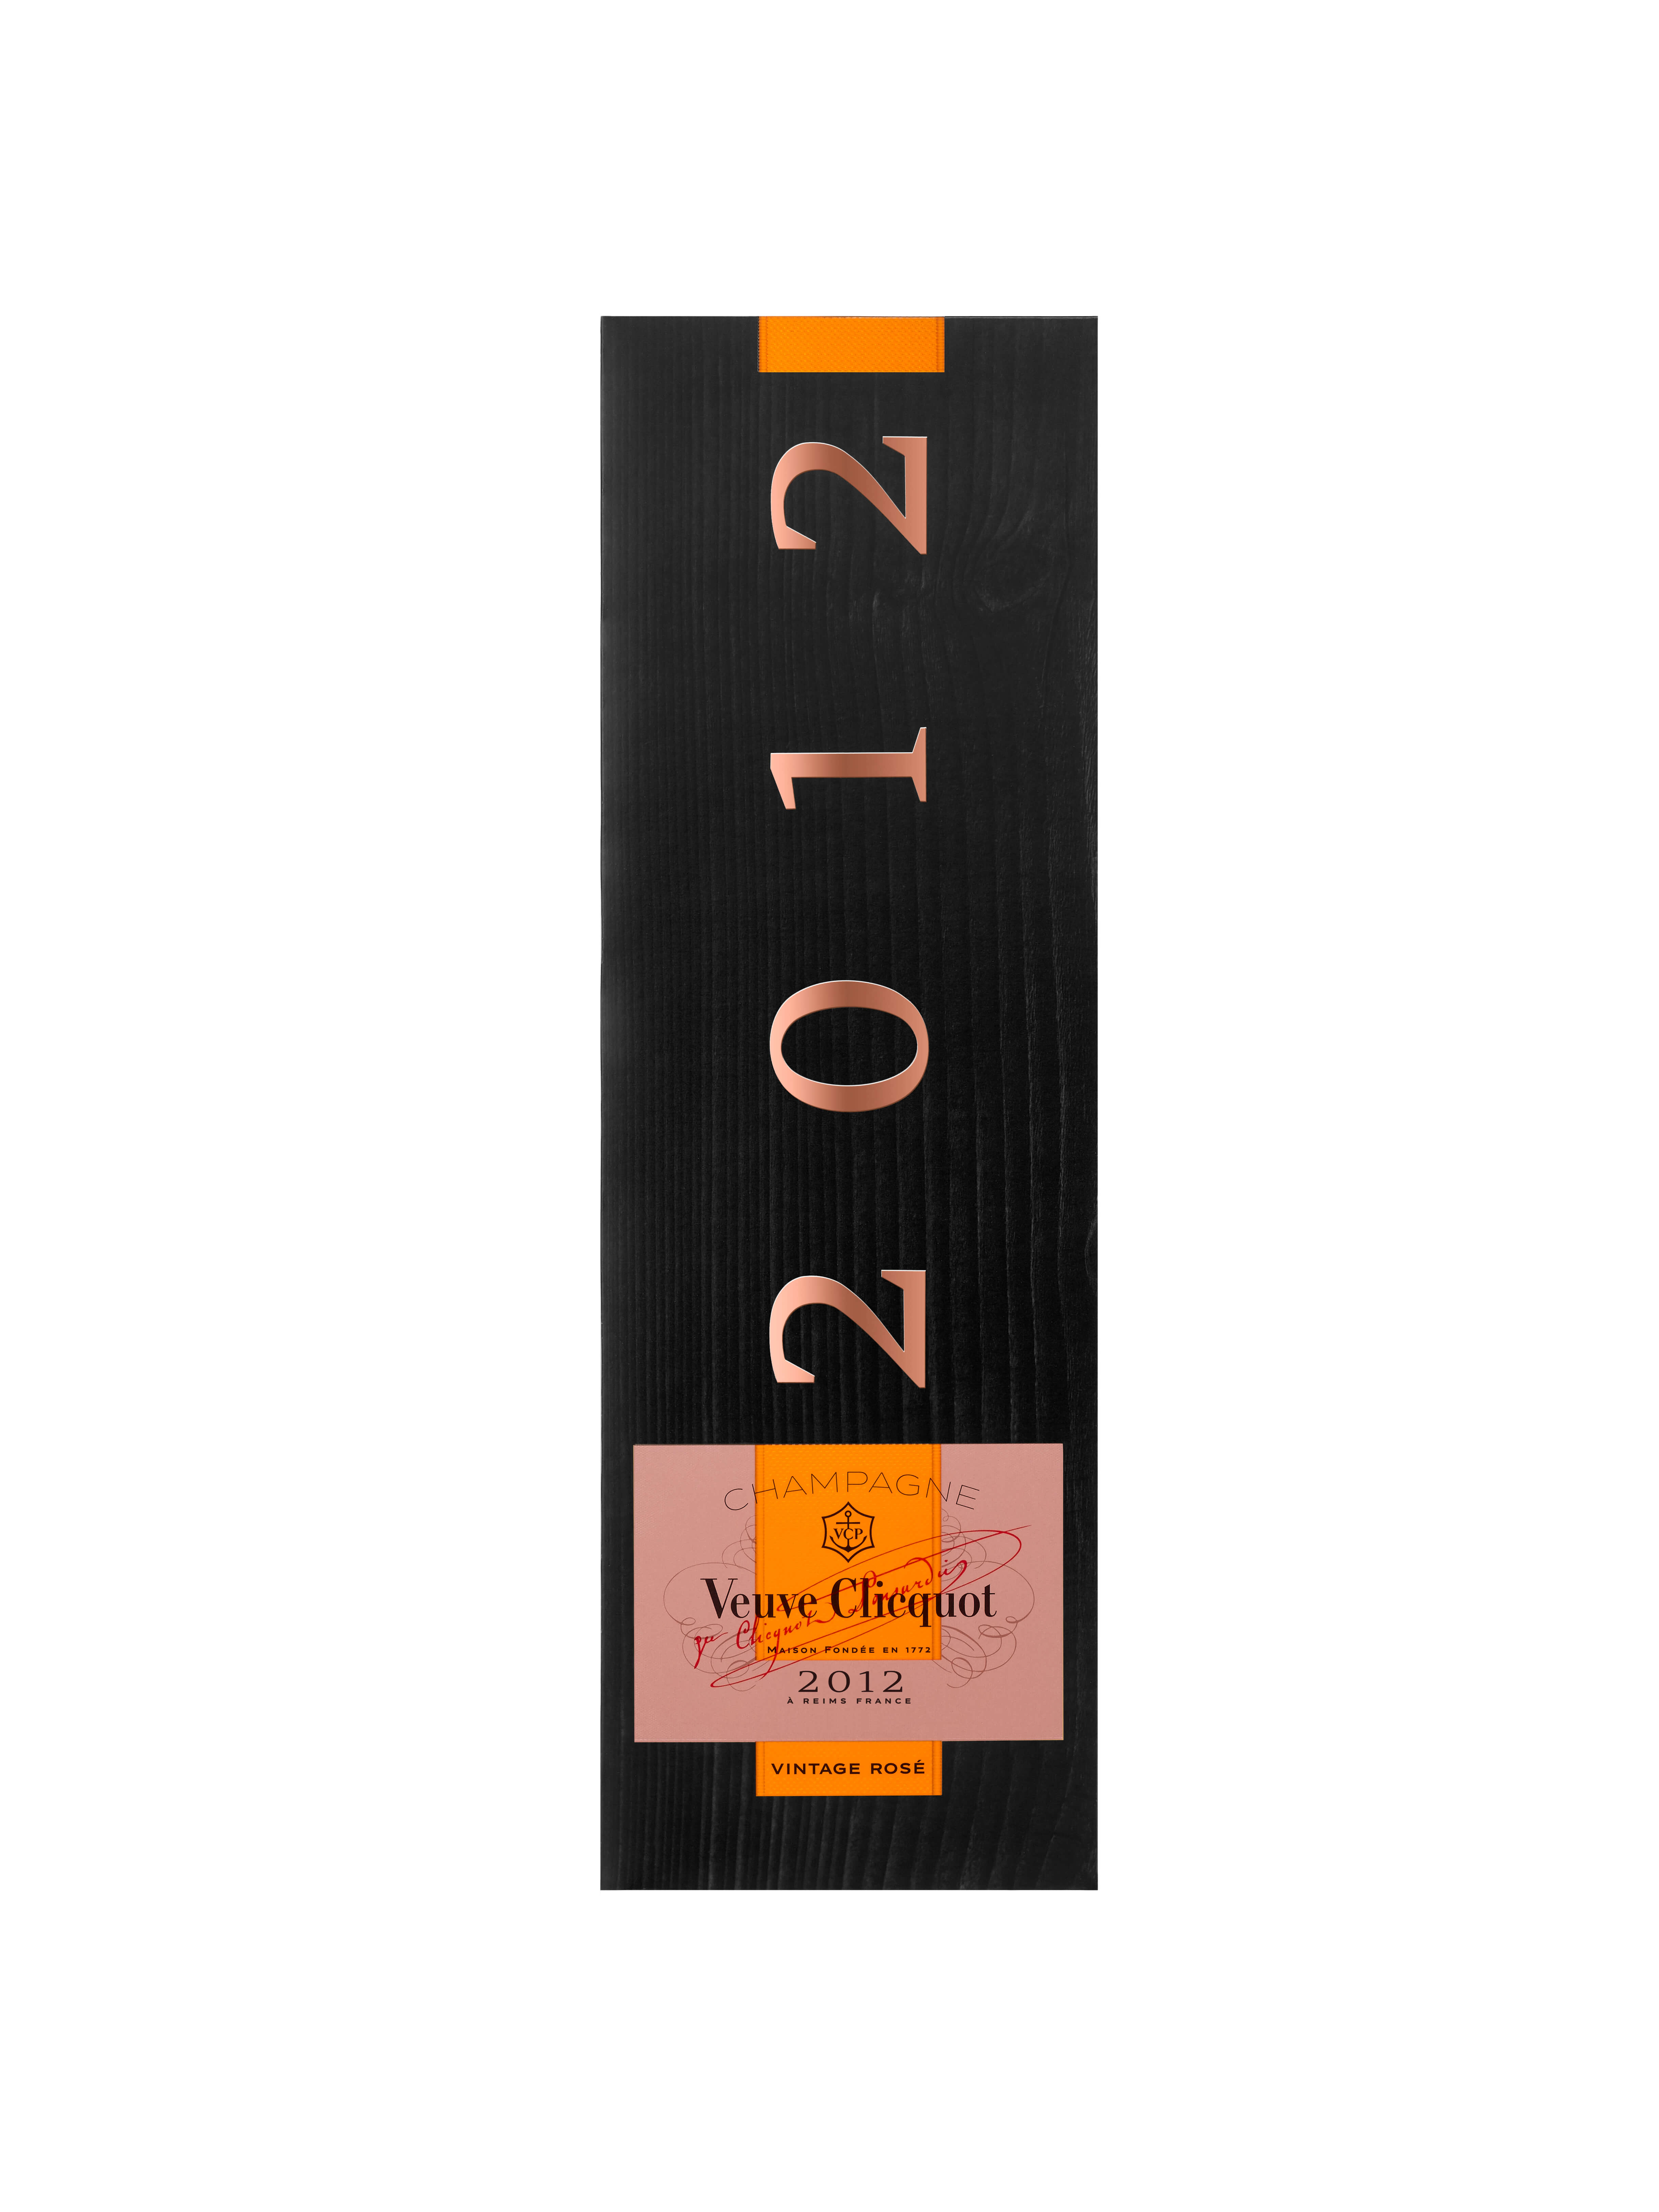 Veuve Clicquot Vintage Rose 2012 with Giftbox